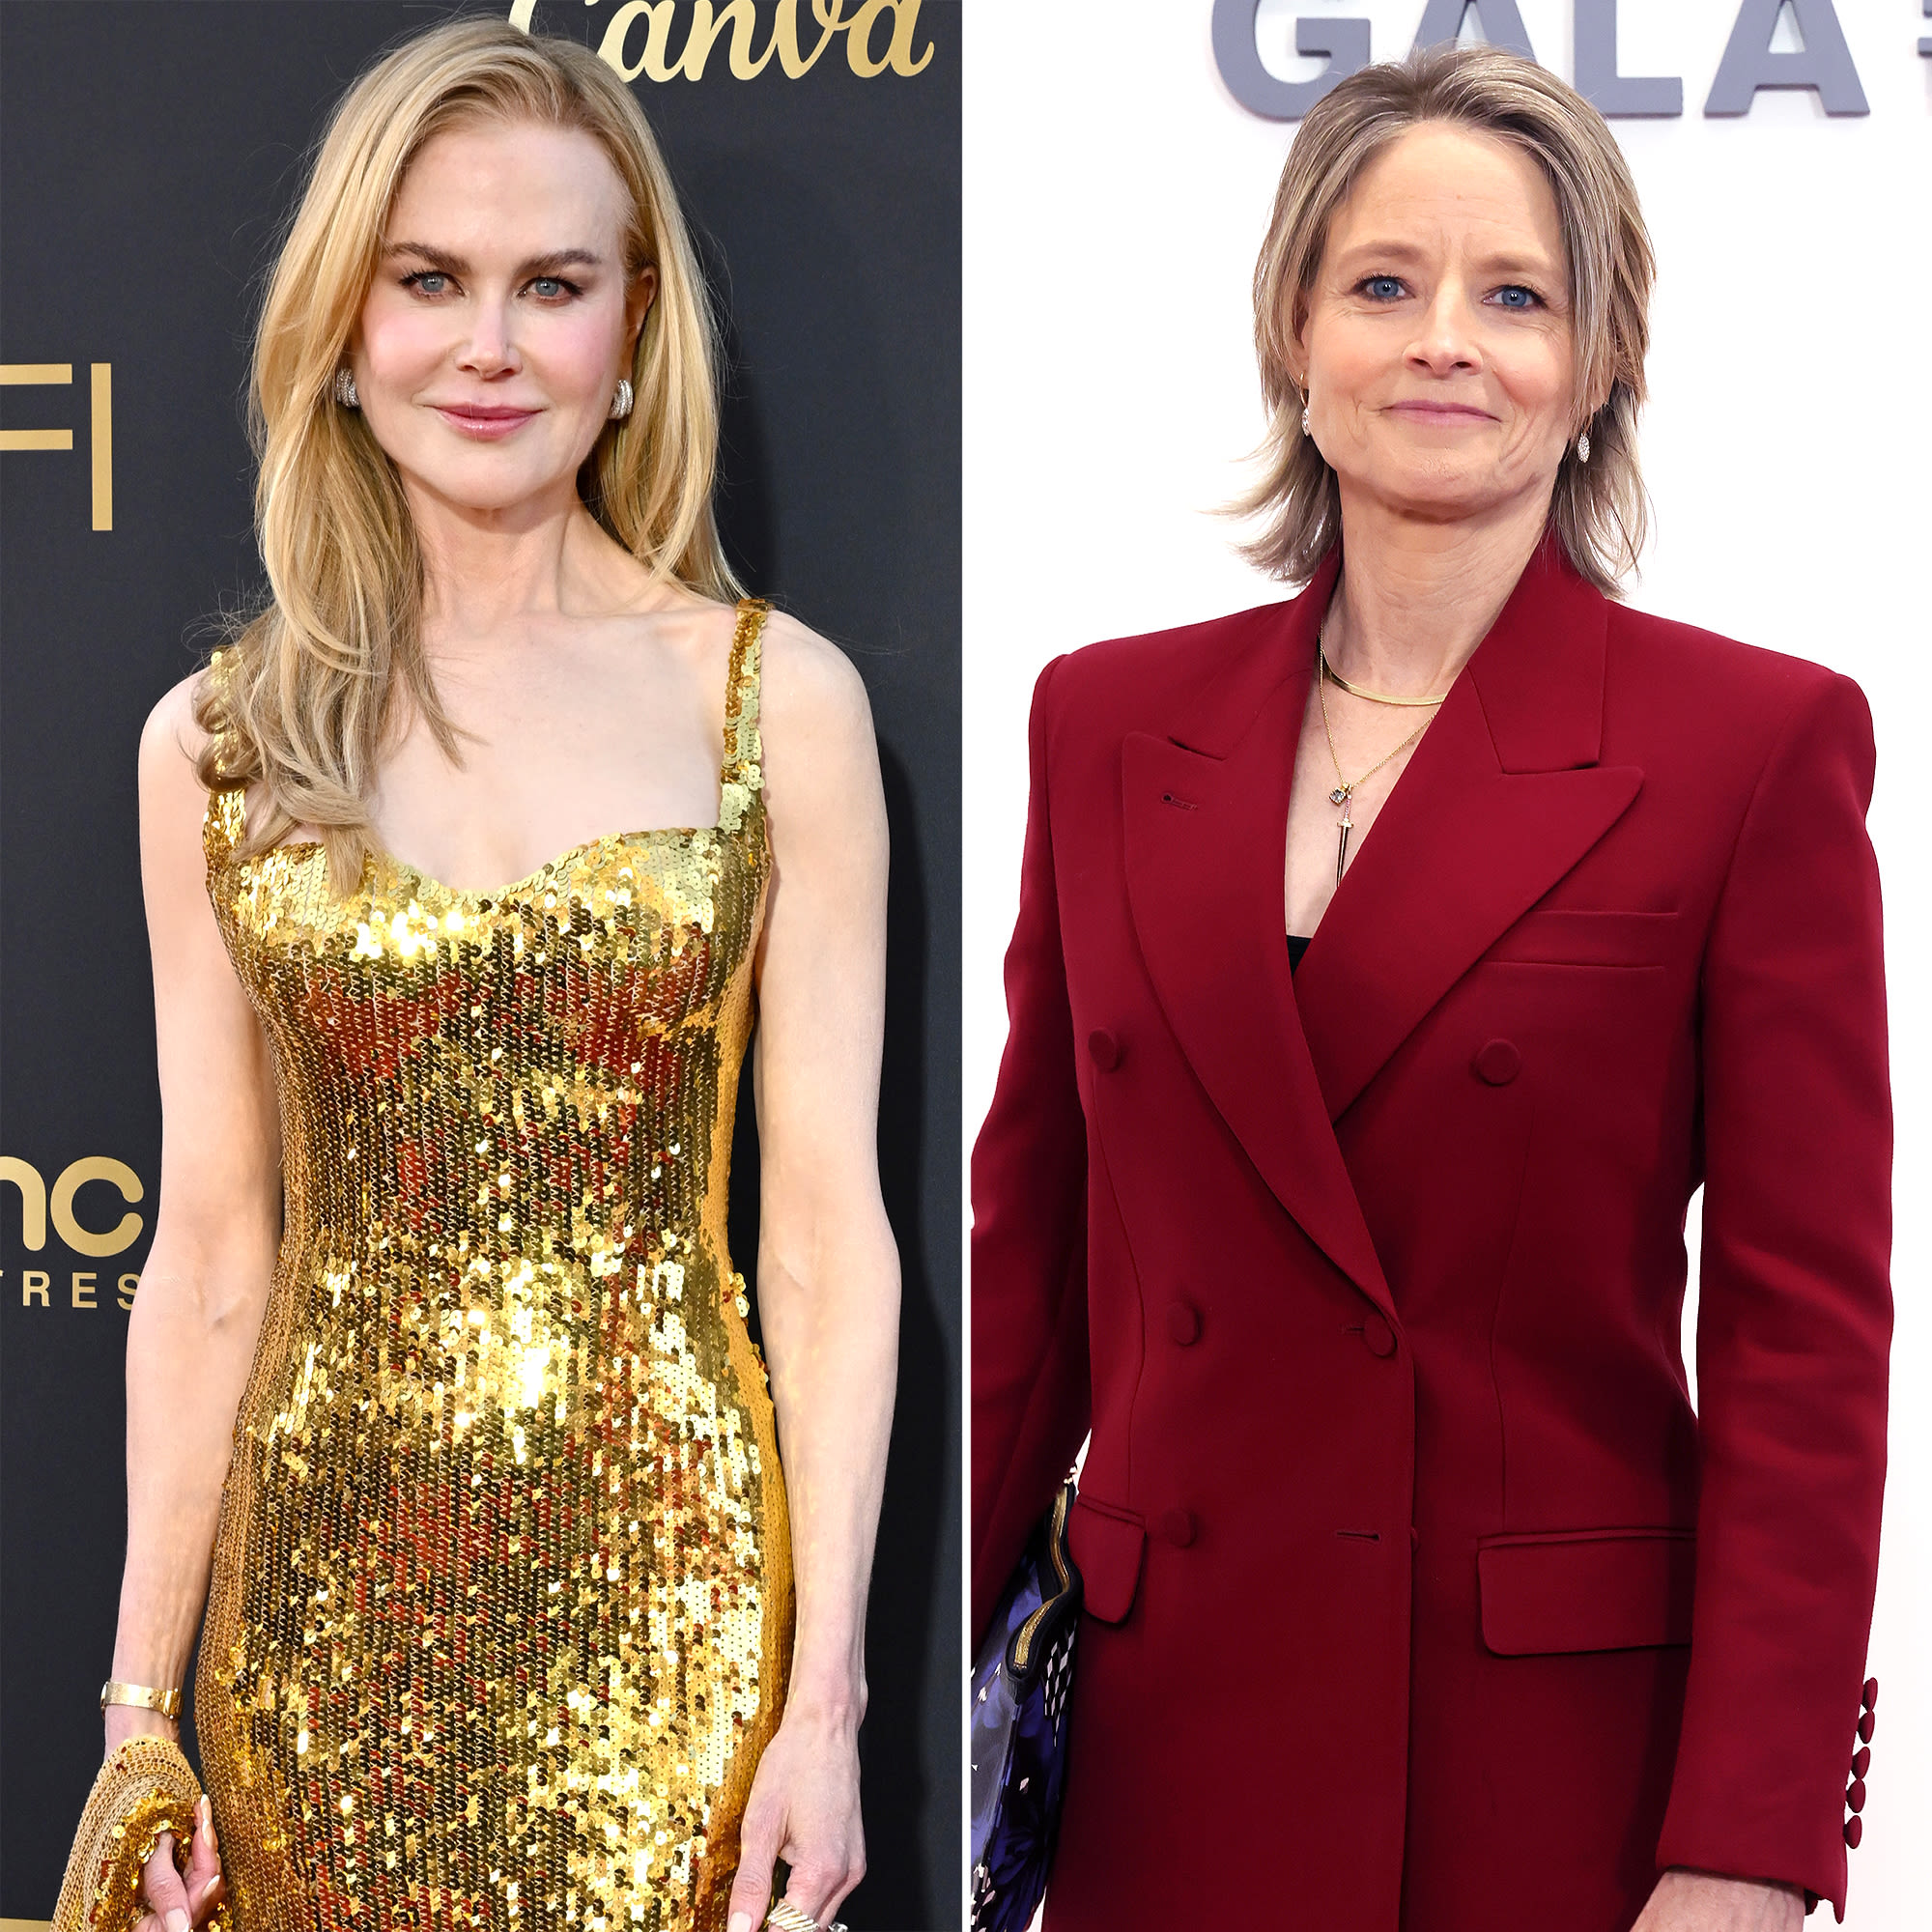 Nicole Kidman Thanks Jodie Foster for Replacing Her in ‘Panic Room’ Amid ‘Breakdown’